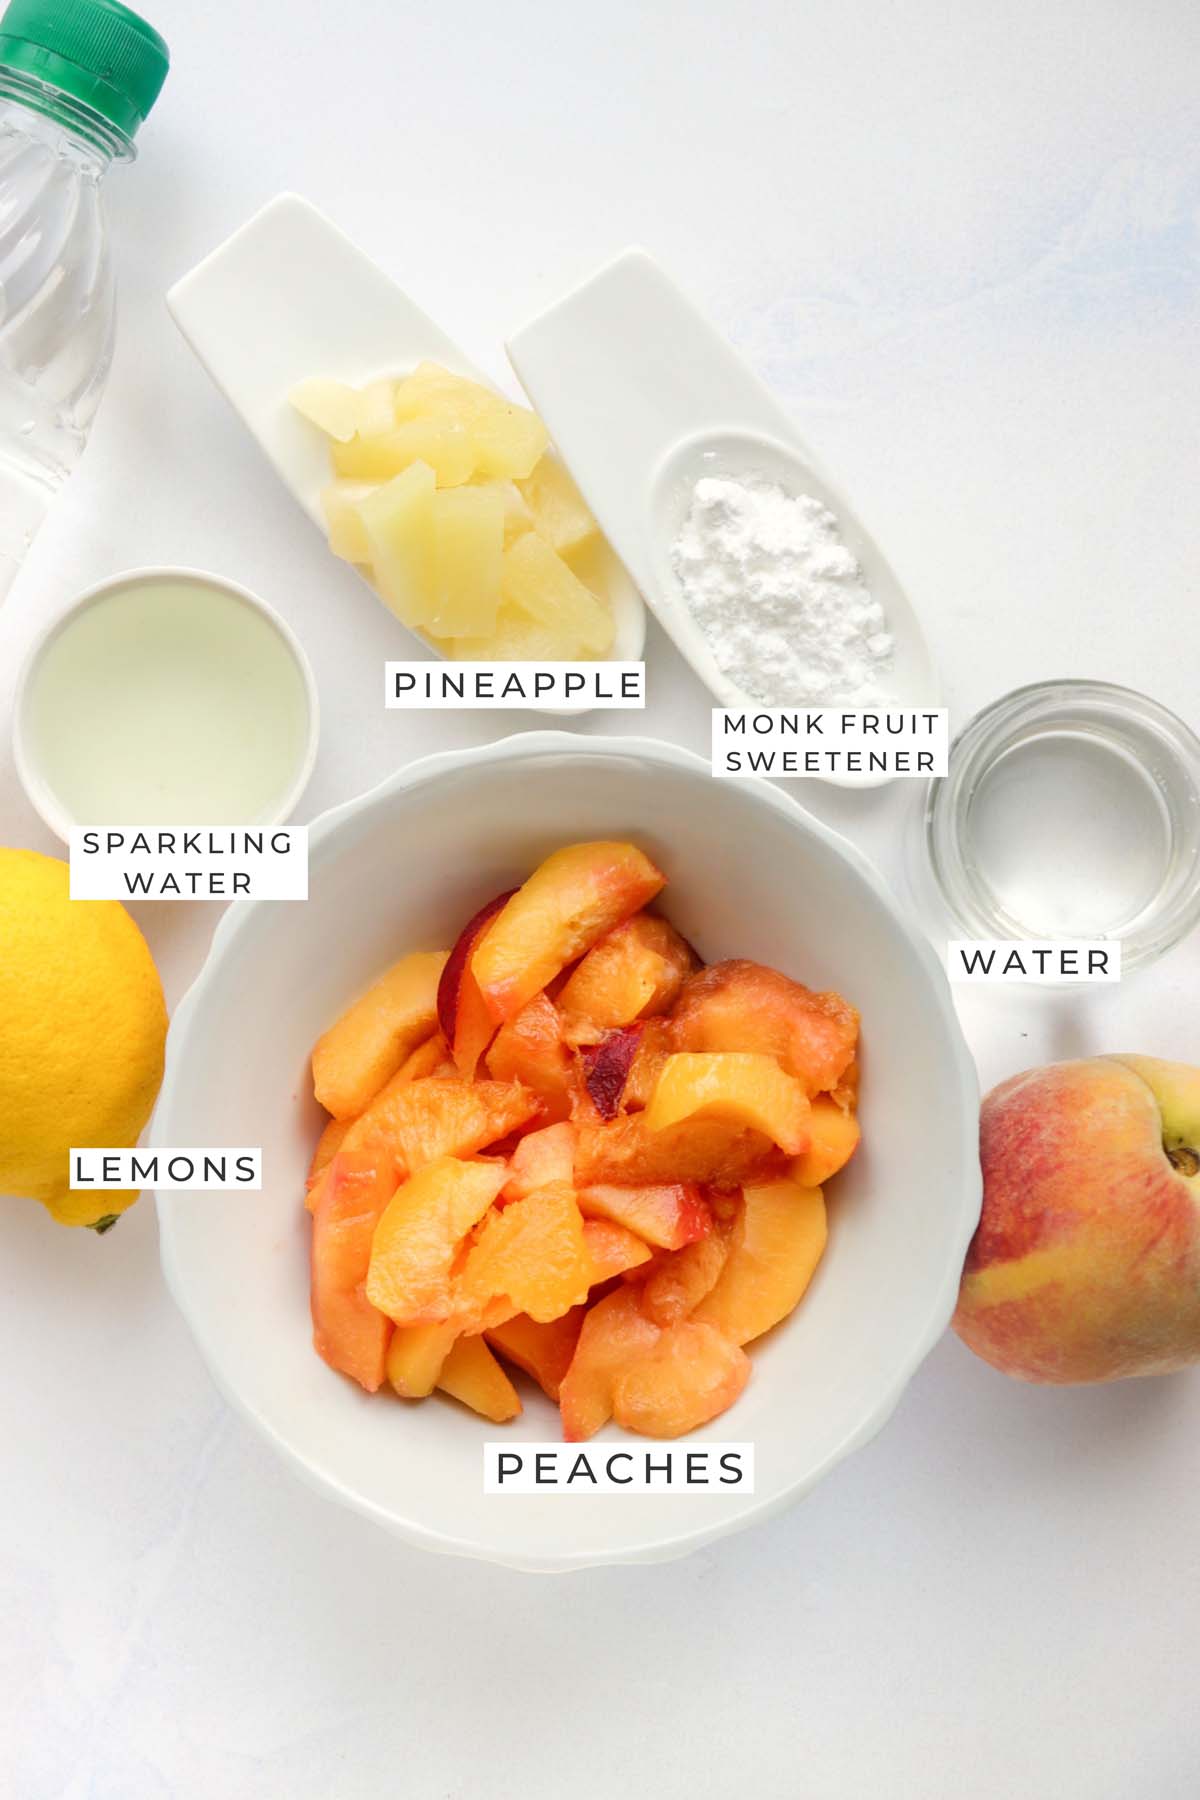 sparkling lemonade with pineapple and peach labeled ingredients.